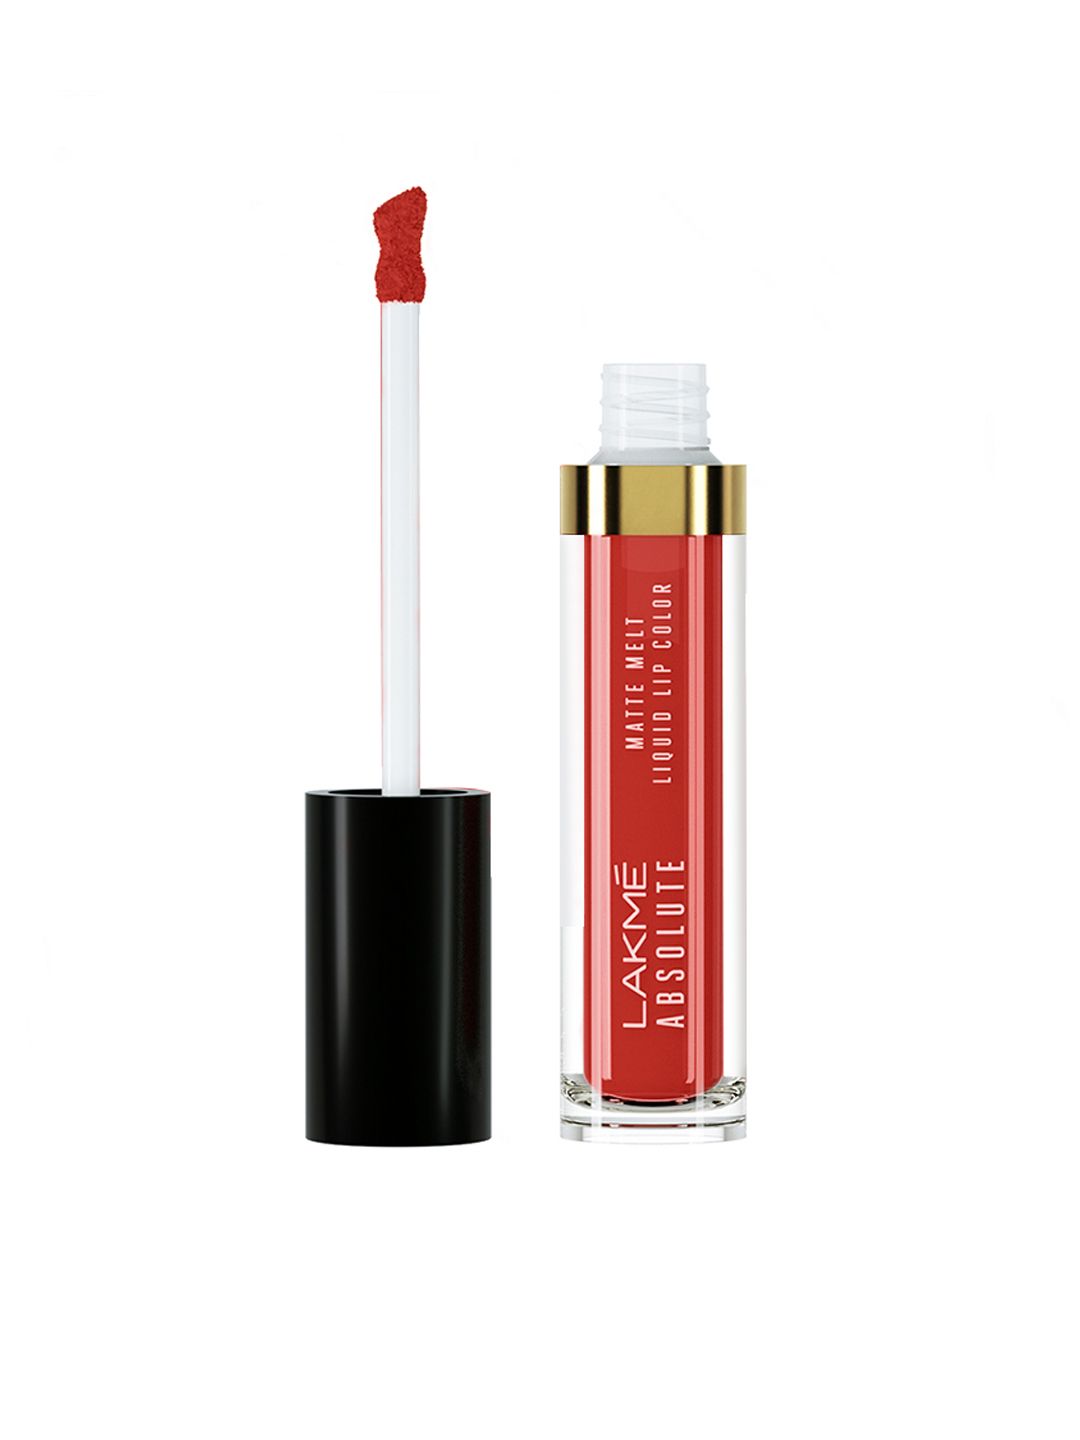 Lakme Absolute Matte Melt Liquid Lip Color - Rhythmic Red 131 Price in India